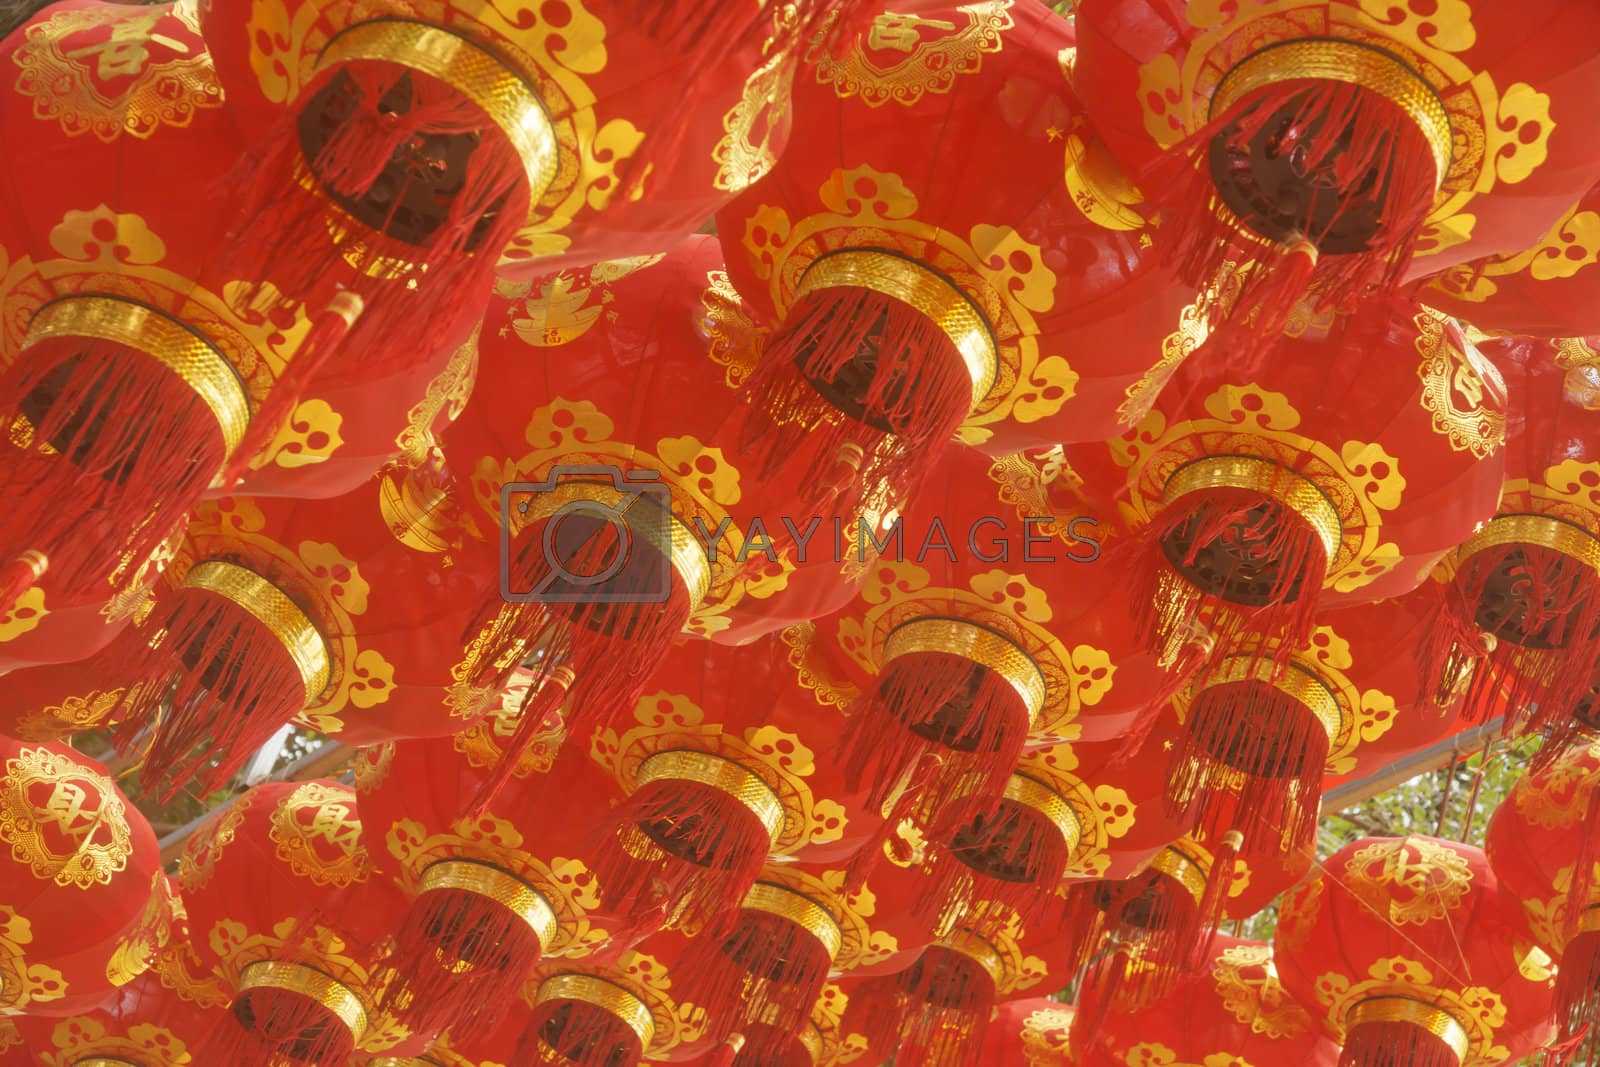 Royalty free image of Chinese New Year red lanterns hanging high above by xfdly5